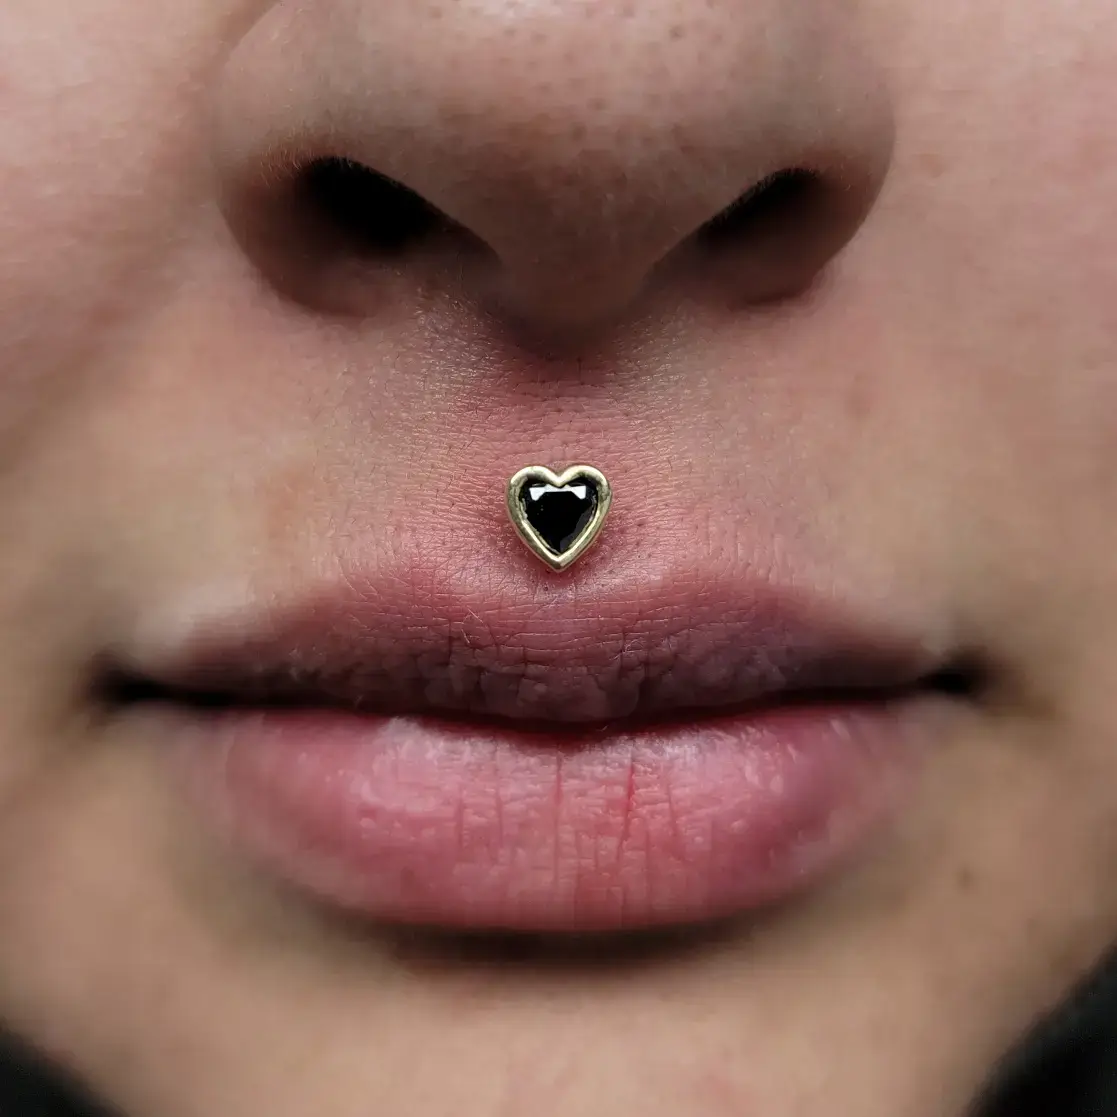 Philtrum piercing done with a BLM heart in yellow gold